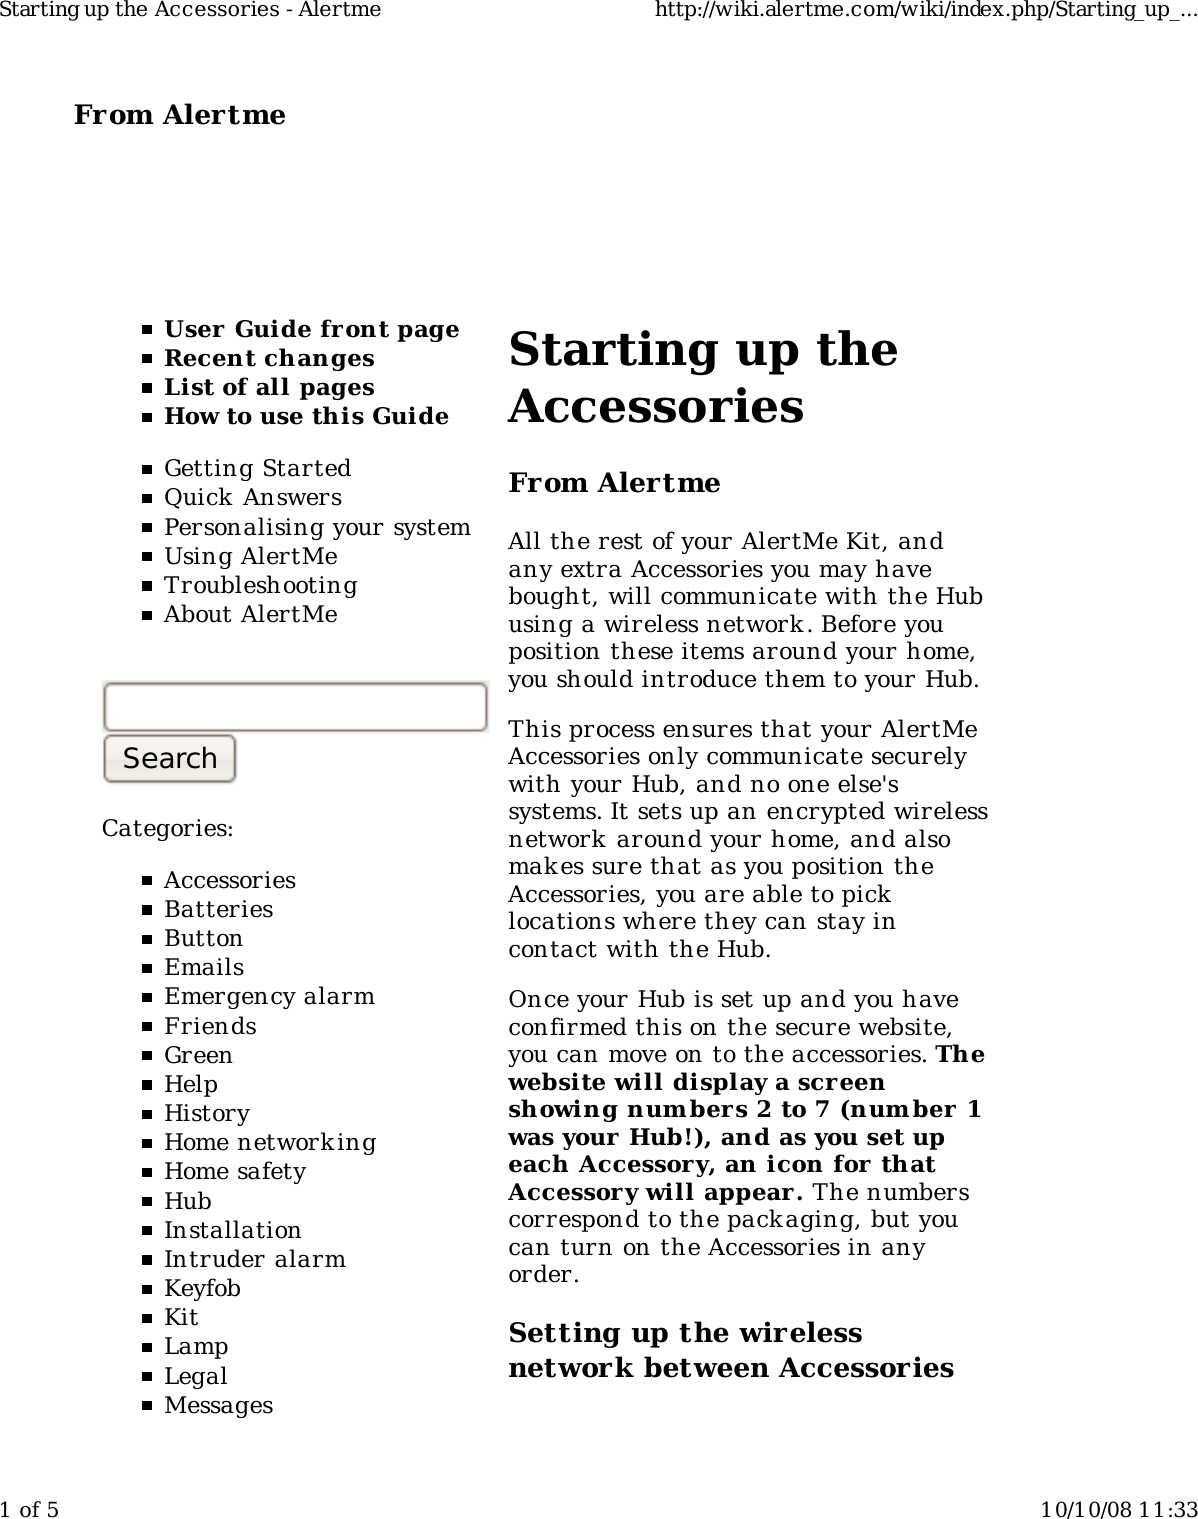 From Alertme  User Guide front pageRecent changesList of all pagesHow to use this GuideGetting StartedQuick AnswersPersonalising your systemUsing AlertMeTroubleshootingAbout AlertMeCategories:AccessoriesBatteriesButtonEmailsEmergency alarmFriendsGreenHelpHistoryHome network ingHome safetyHubInstallationIntruder alarmKeyfobKitLampLegalMessagesStarting up theAccessoriesFrom AlertmeAll the rest of your AlertMe Kit, andany extra Accessories you may havebought, will communicate with the Hubusing a wireless network . Before youposition these items around your home,you should introduce them to your Hub.This process ensures that your AlertMeAccessories only communicate securelywith your Hub, and no one else&apos;ssystems. It sets up an encrypted wirelessnetwork  around your home, and alsomak es sure that as you position theAccessories, you are able to picklocations where they can stay incontact with the Hub.Once your Hub is set up and you haveconfirmed this on the secure website,you can move on to the accessories. Thewebsite will display a screenshowing num bers 2 to 7 (num ber 1was your Hub!), and as you set upeach Accessory, an icon for thatAccessor y will appear. The numberscorrespond to the packaging, but youcan turn on the Accessories in anyorder.Setting up the wirelessnetwork between AccessoriesStarting up the Accessories - Alertme http://wiki.alertme.com/wiki/index.php/Starting_up_...1 of 5 10/10/08 11:33